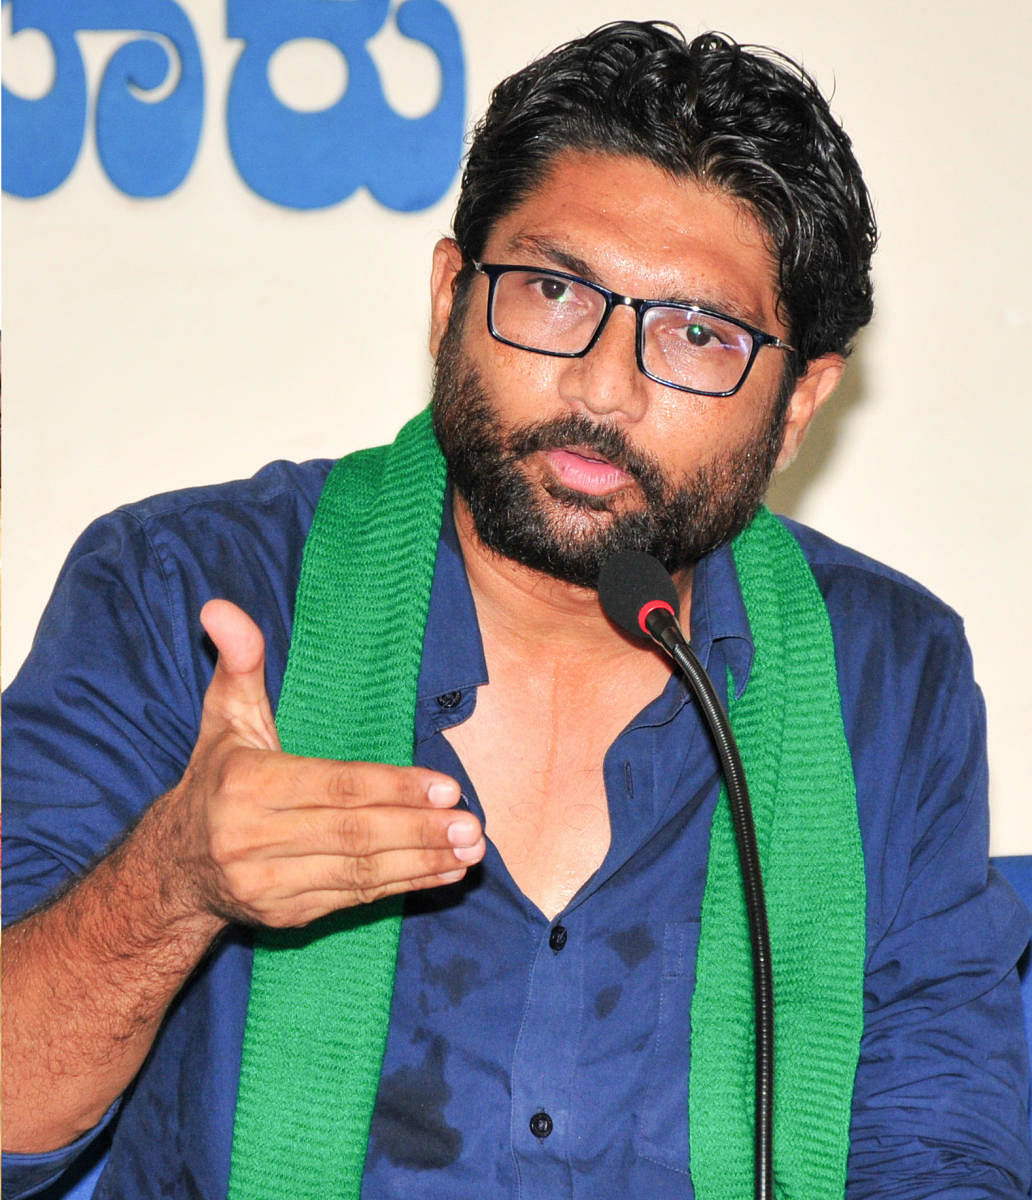 Mevani had come to meet the activists after visiting hours on Thursday evening, therefore, he was not allowed a meeting, Jail Superintendent A K Saxena said. (DH File Photo)